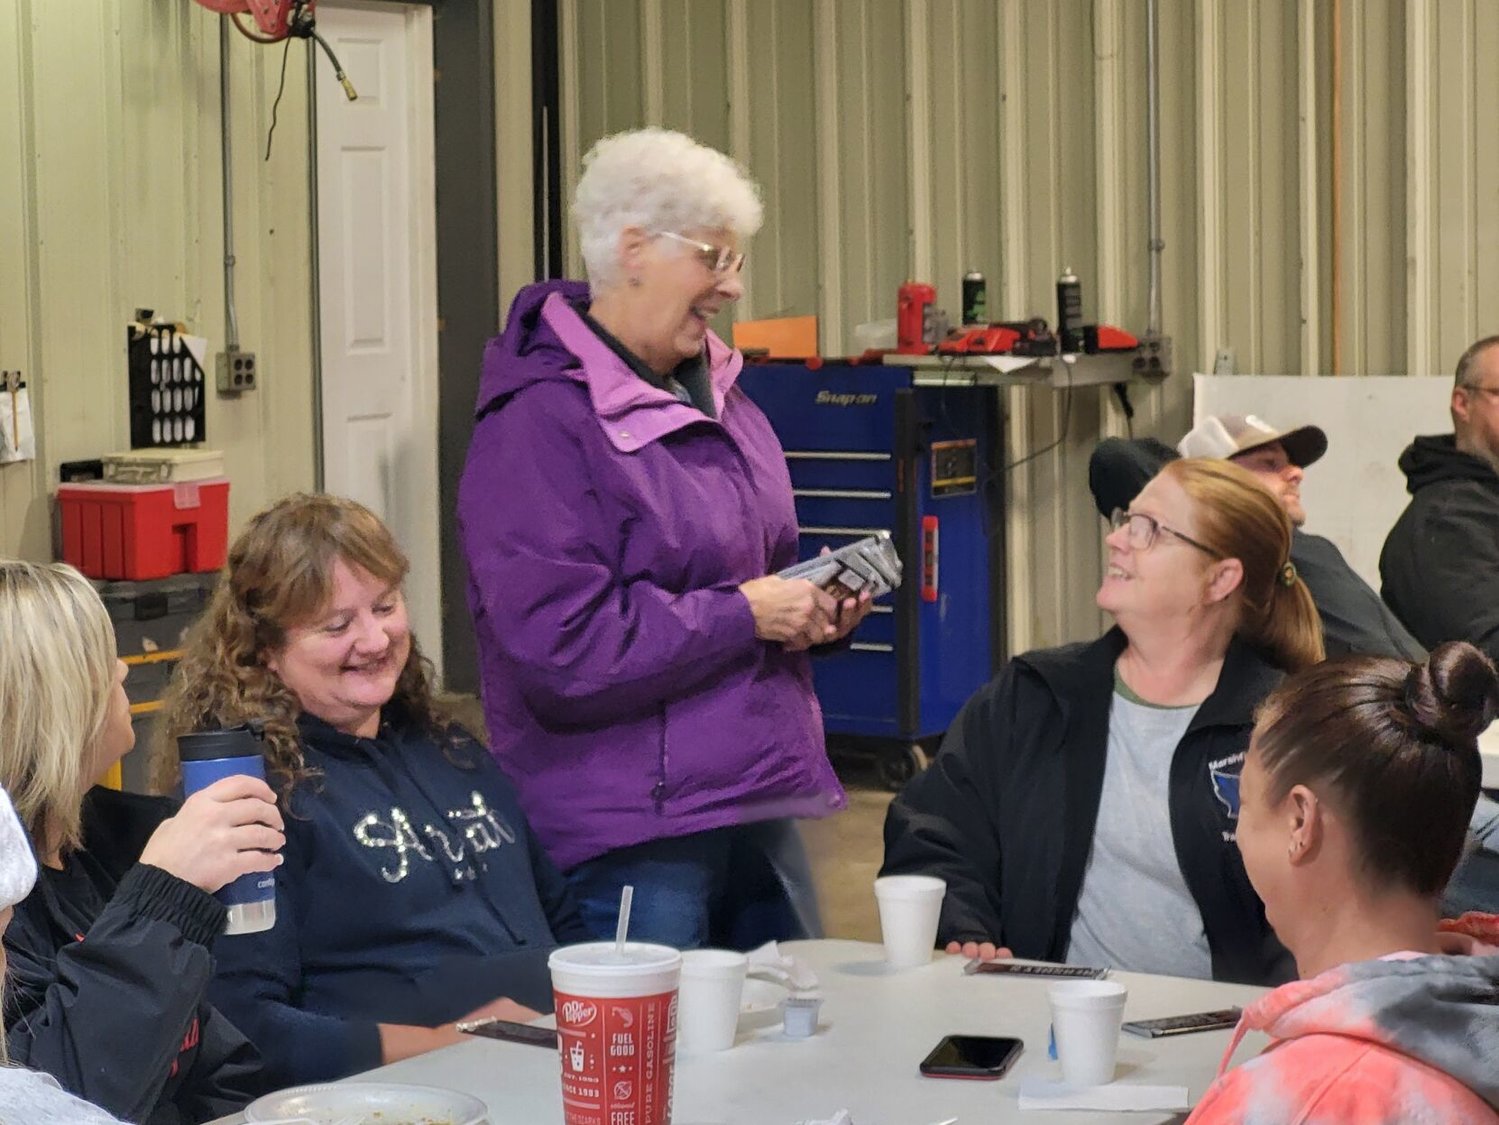 Showing just how 'sweet' she can be, Jo Jones passes out chocolate bars to all her fellow drivers during her retirement party.


Mail Photo by John "J.T." Jones